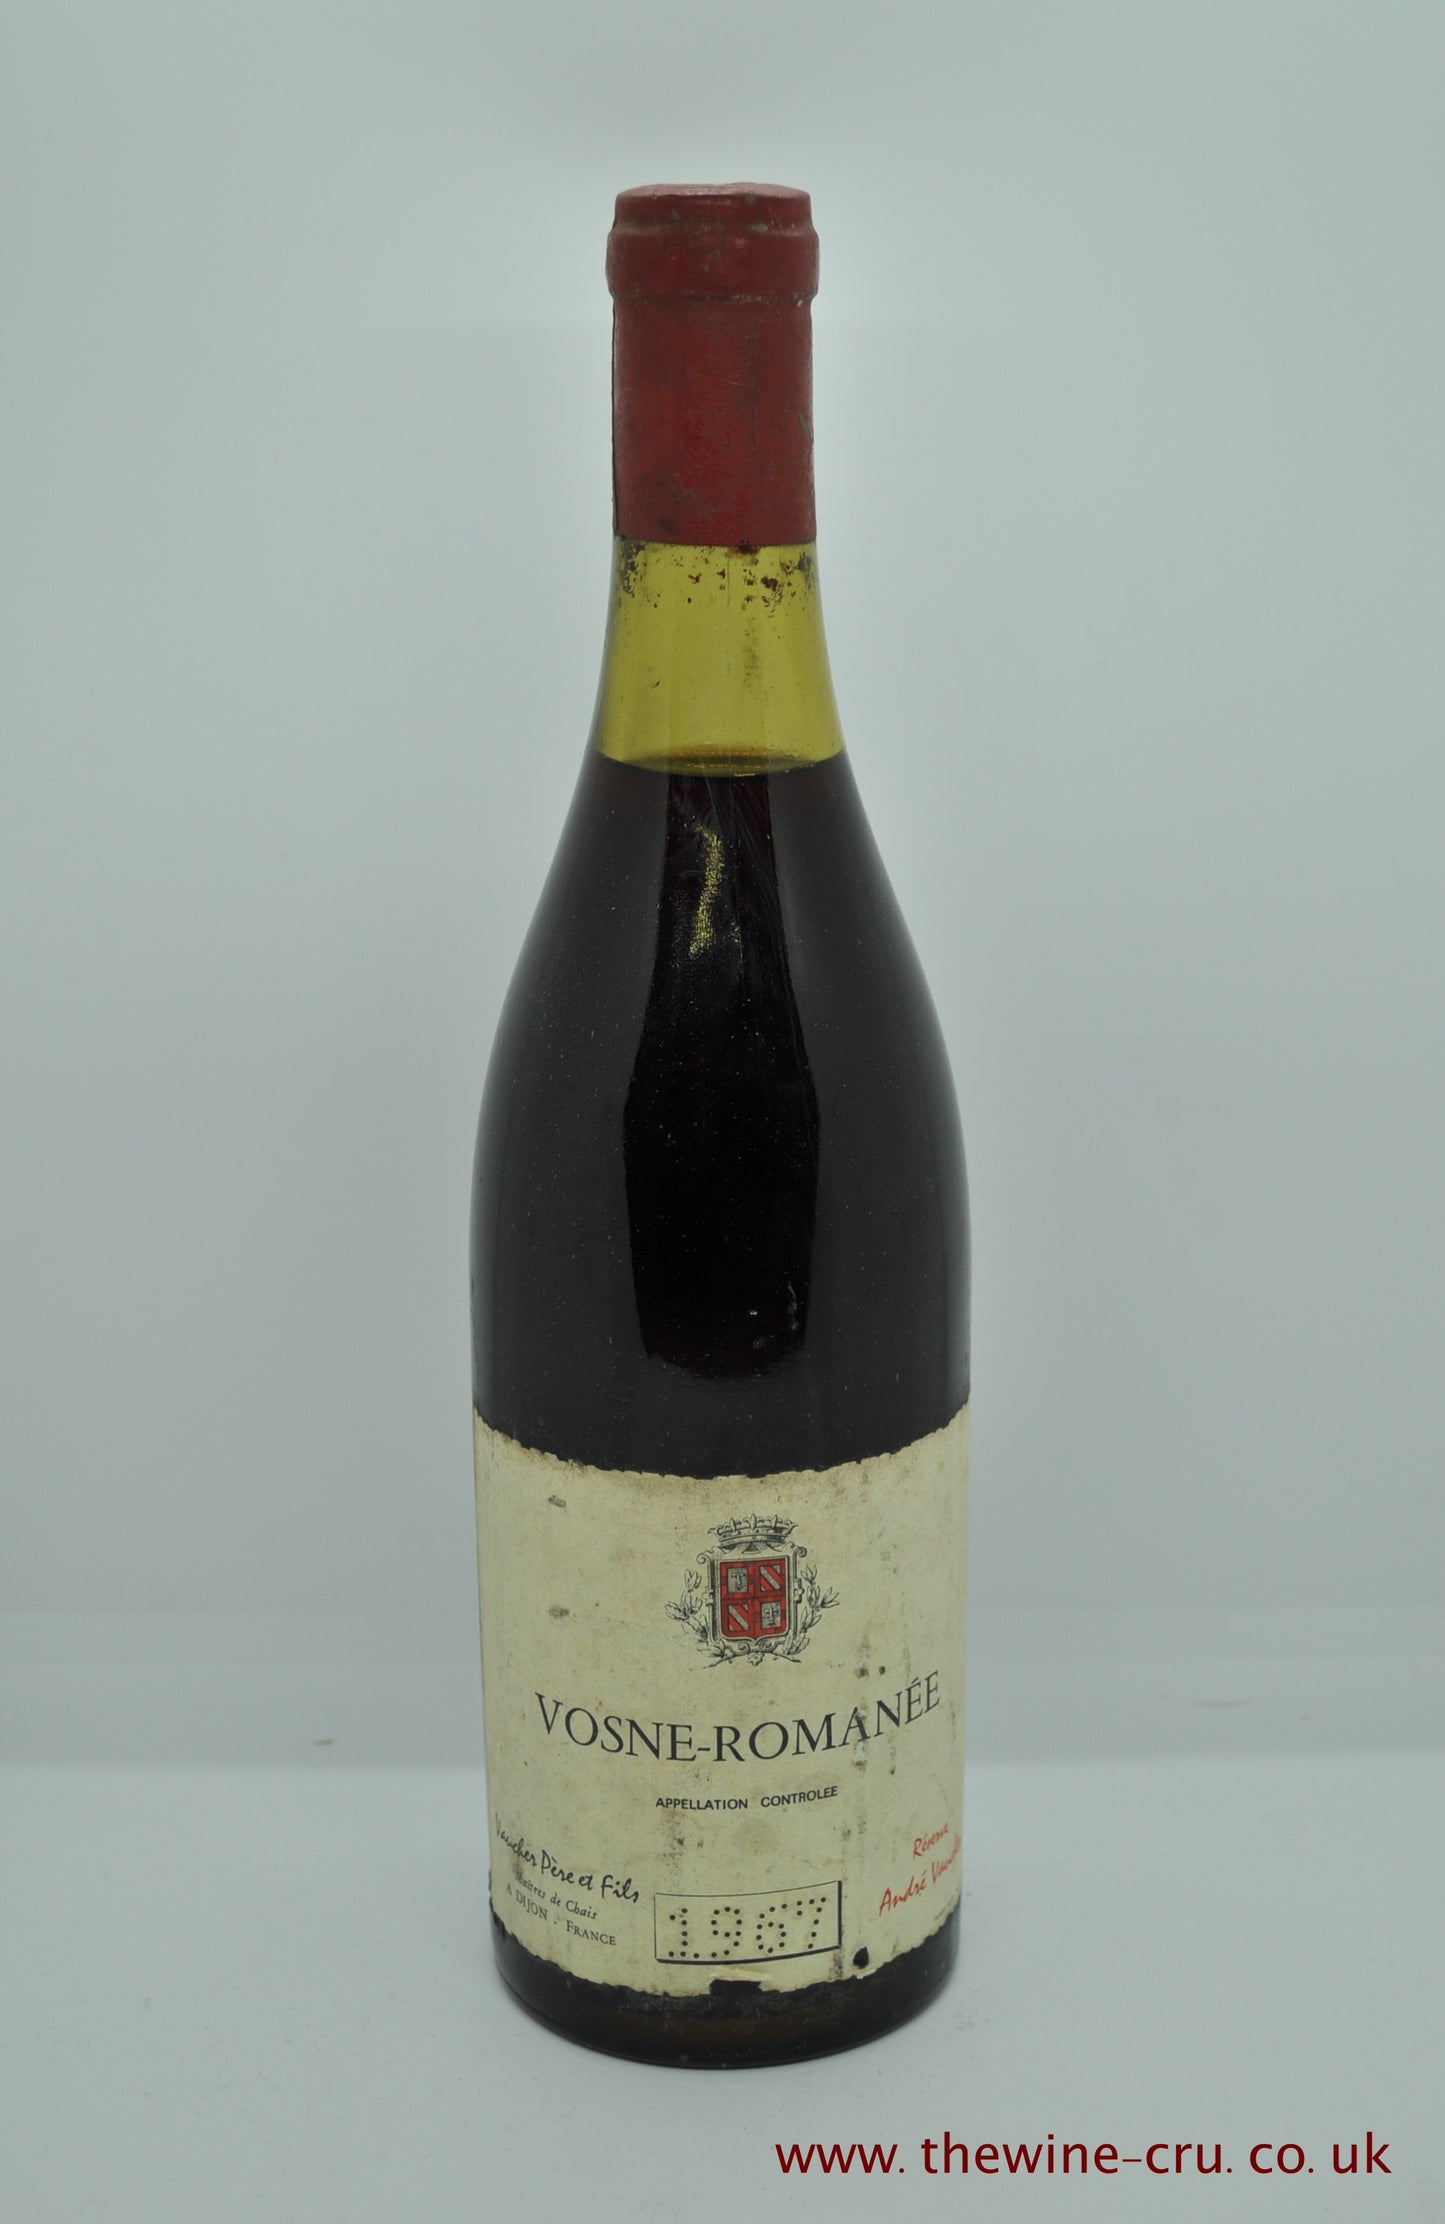 A bottle of 1967 vintage red wine. Vosne-Romanee Vaucher Pere & Fils. Burgundy France. The bottle is in good condition, label a little bin soiled and the level is 3cm below base of the cork. Gift wrapping available. Immediate delivery. Free local delivery.